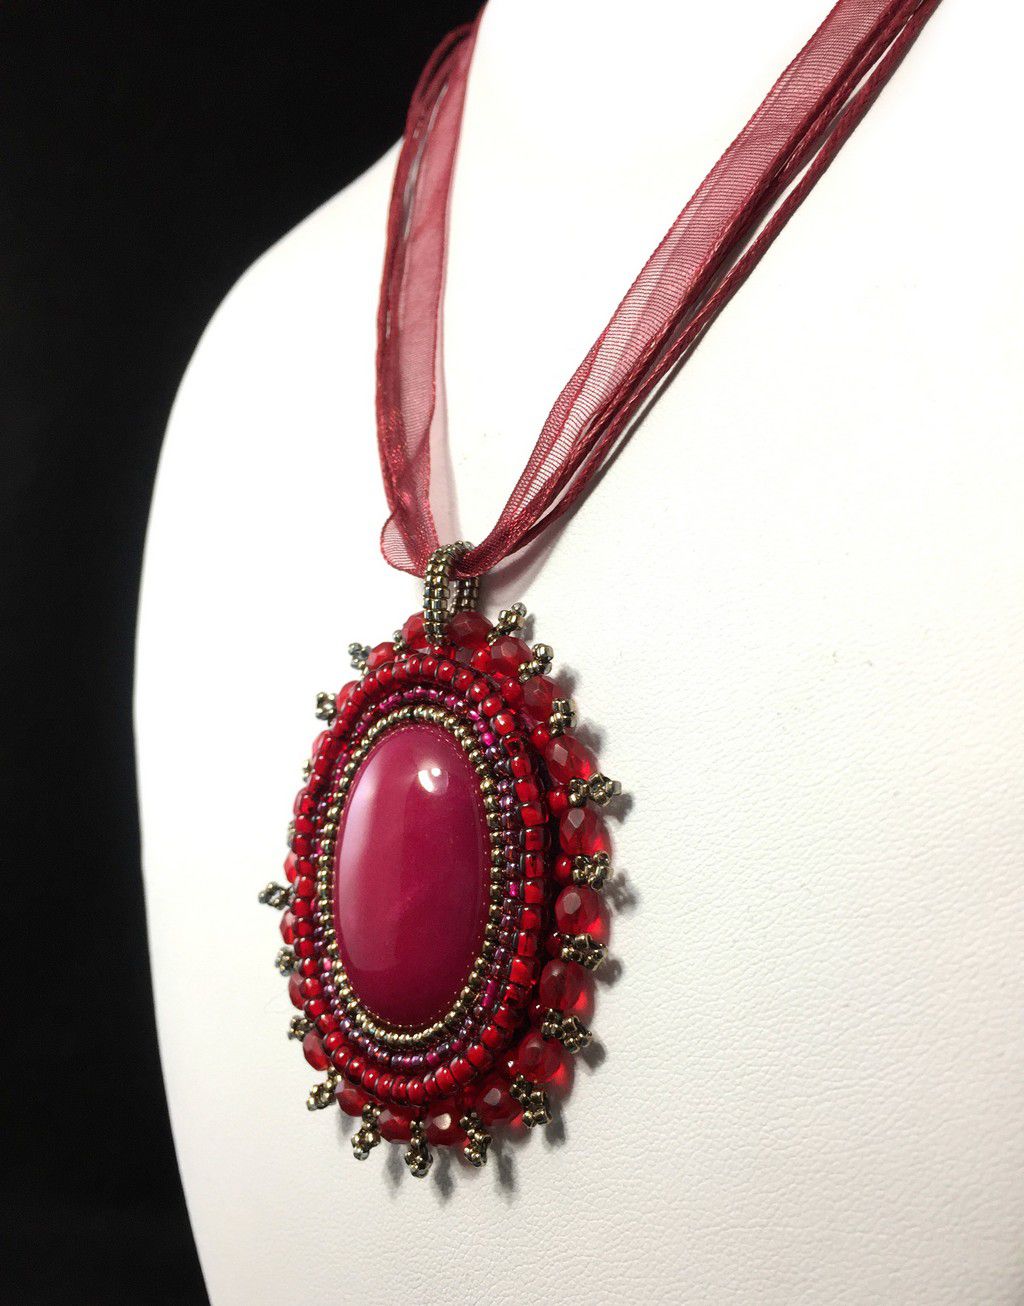 Red Victorian necklace